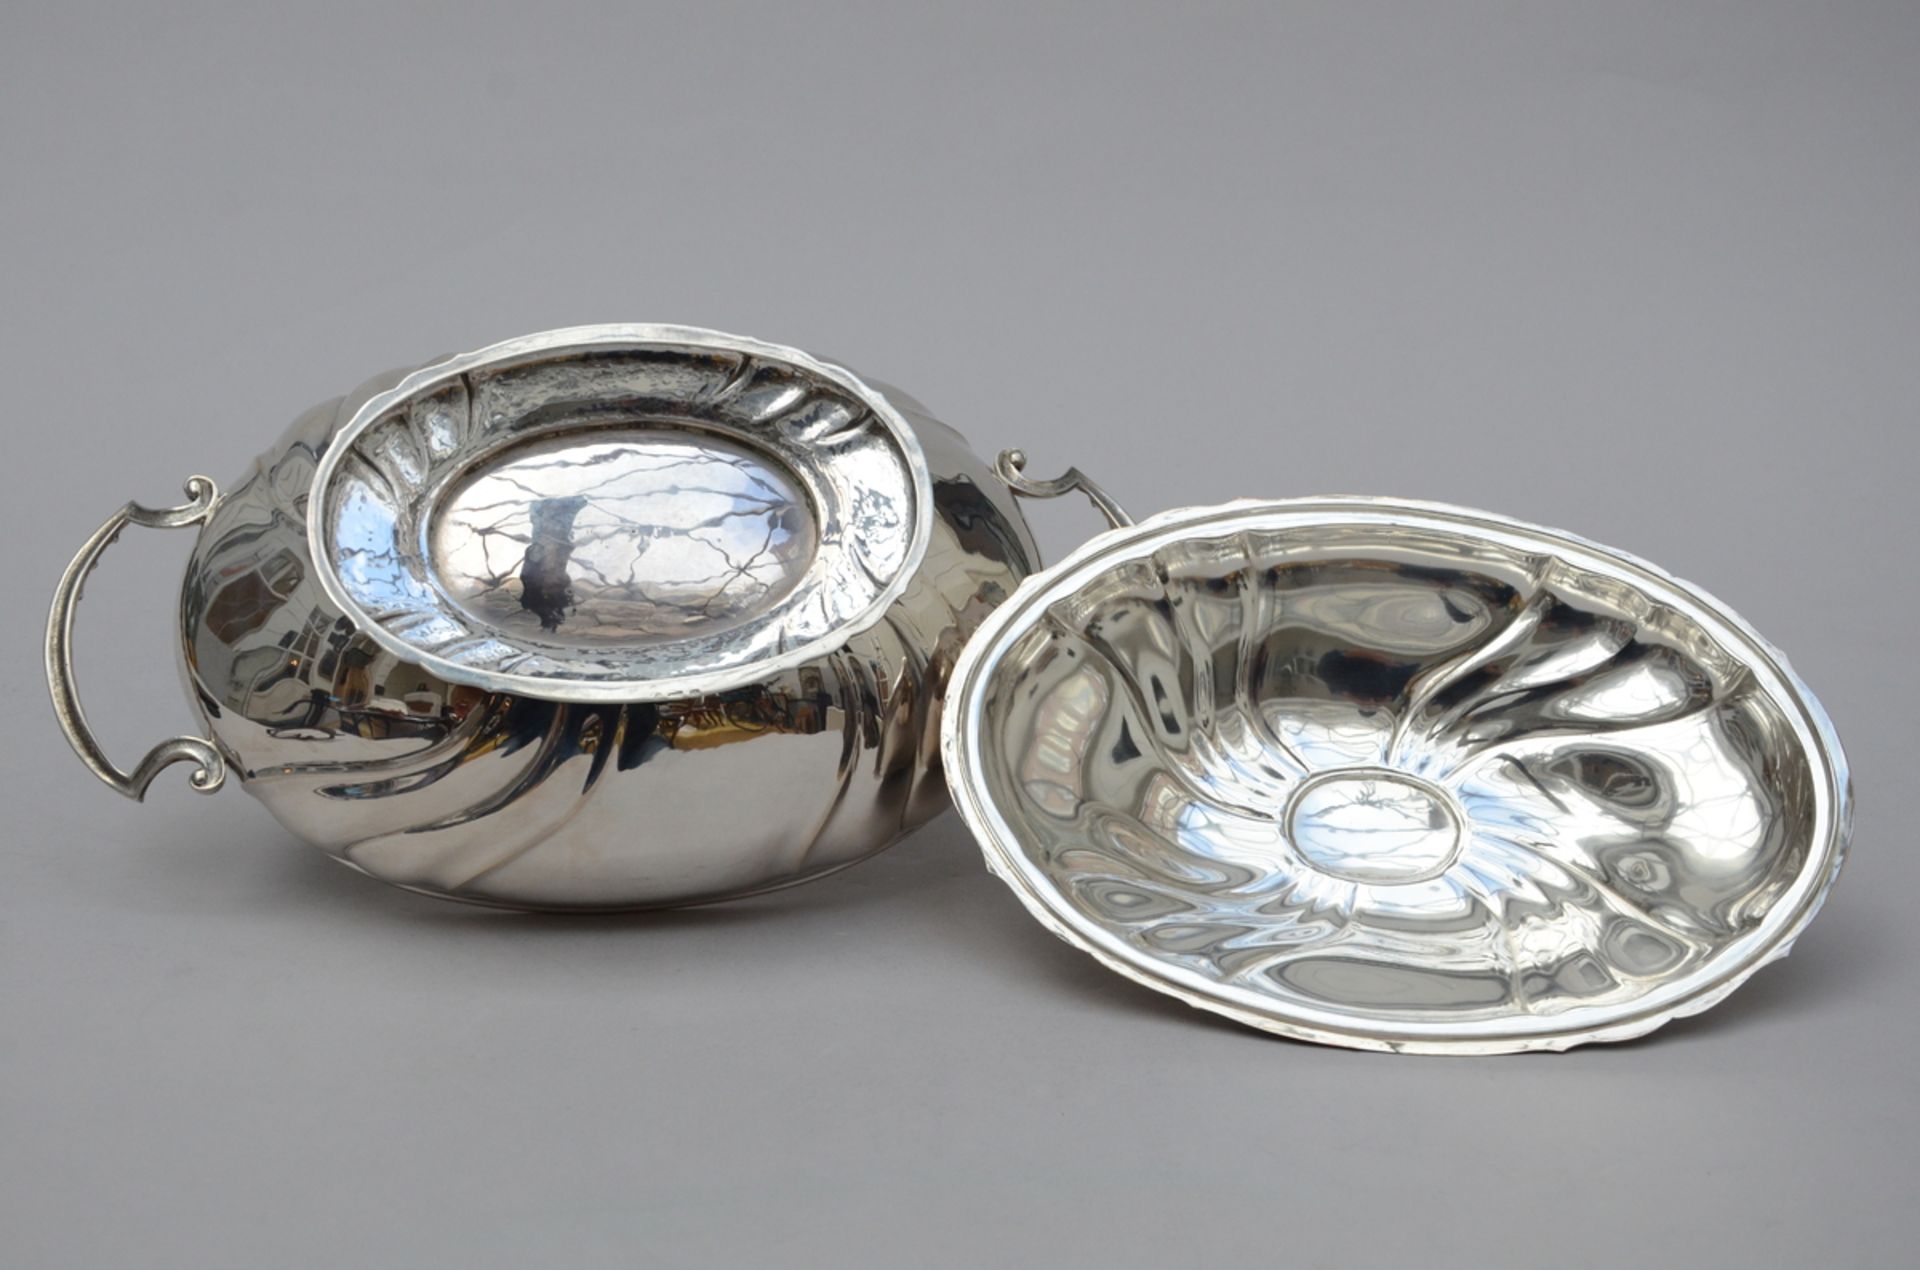 A silver vegetable bowl (19x35x19.5cm) - Image 3 of 4